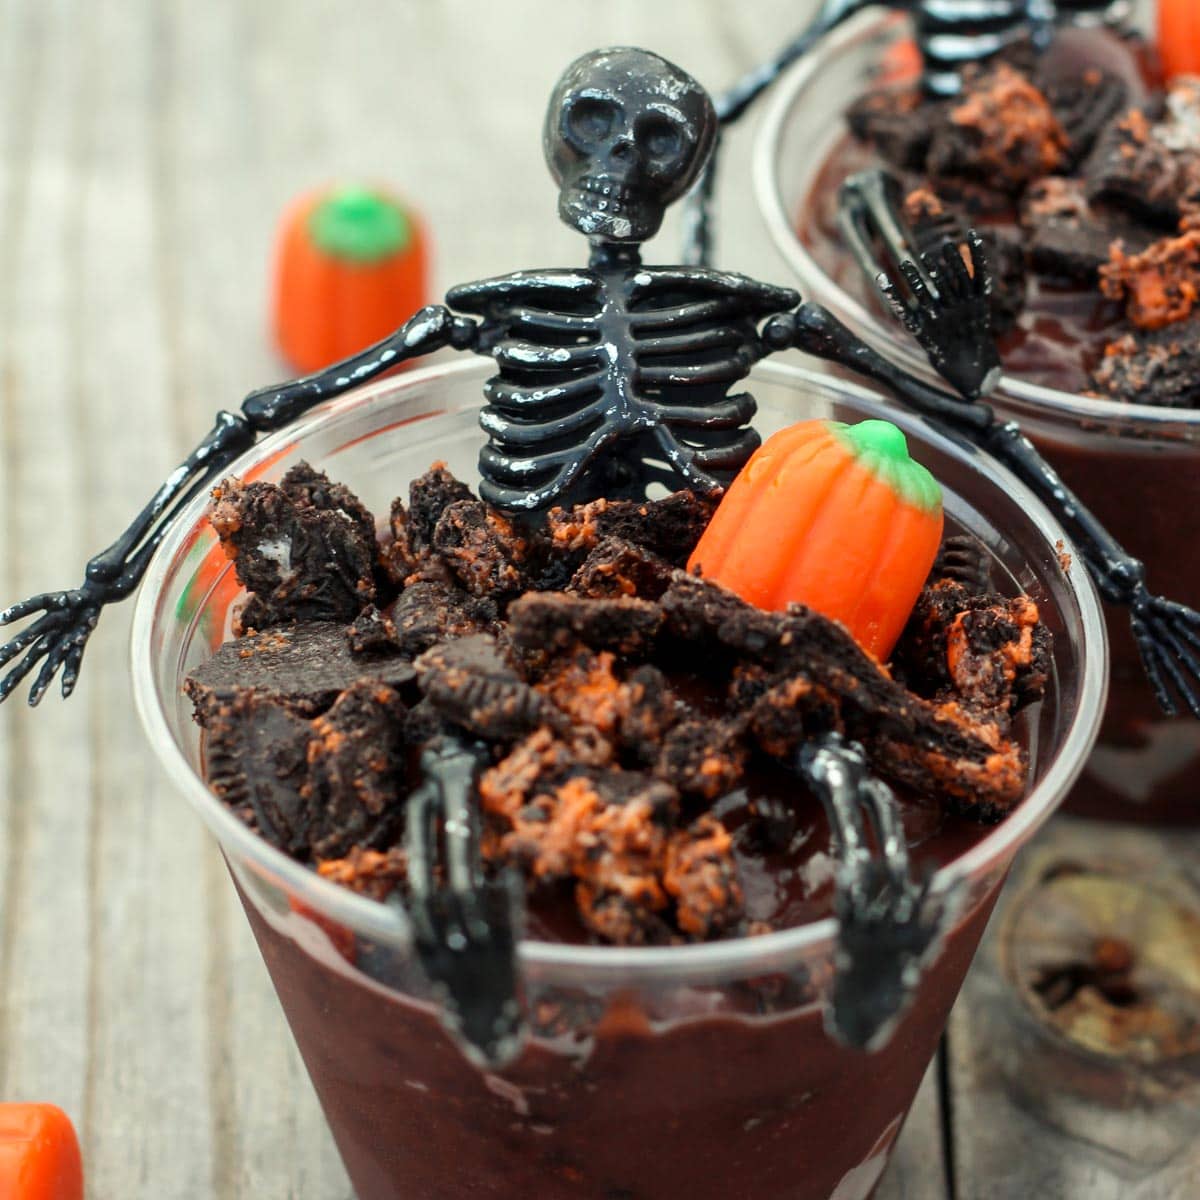 Halloween dinner ideas - skeleton pudding cups topped with crushed Halloween Oreos.